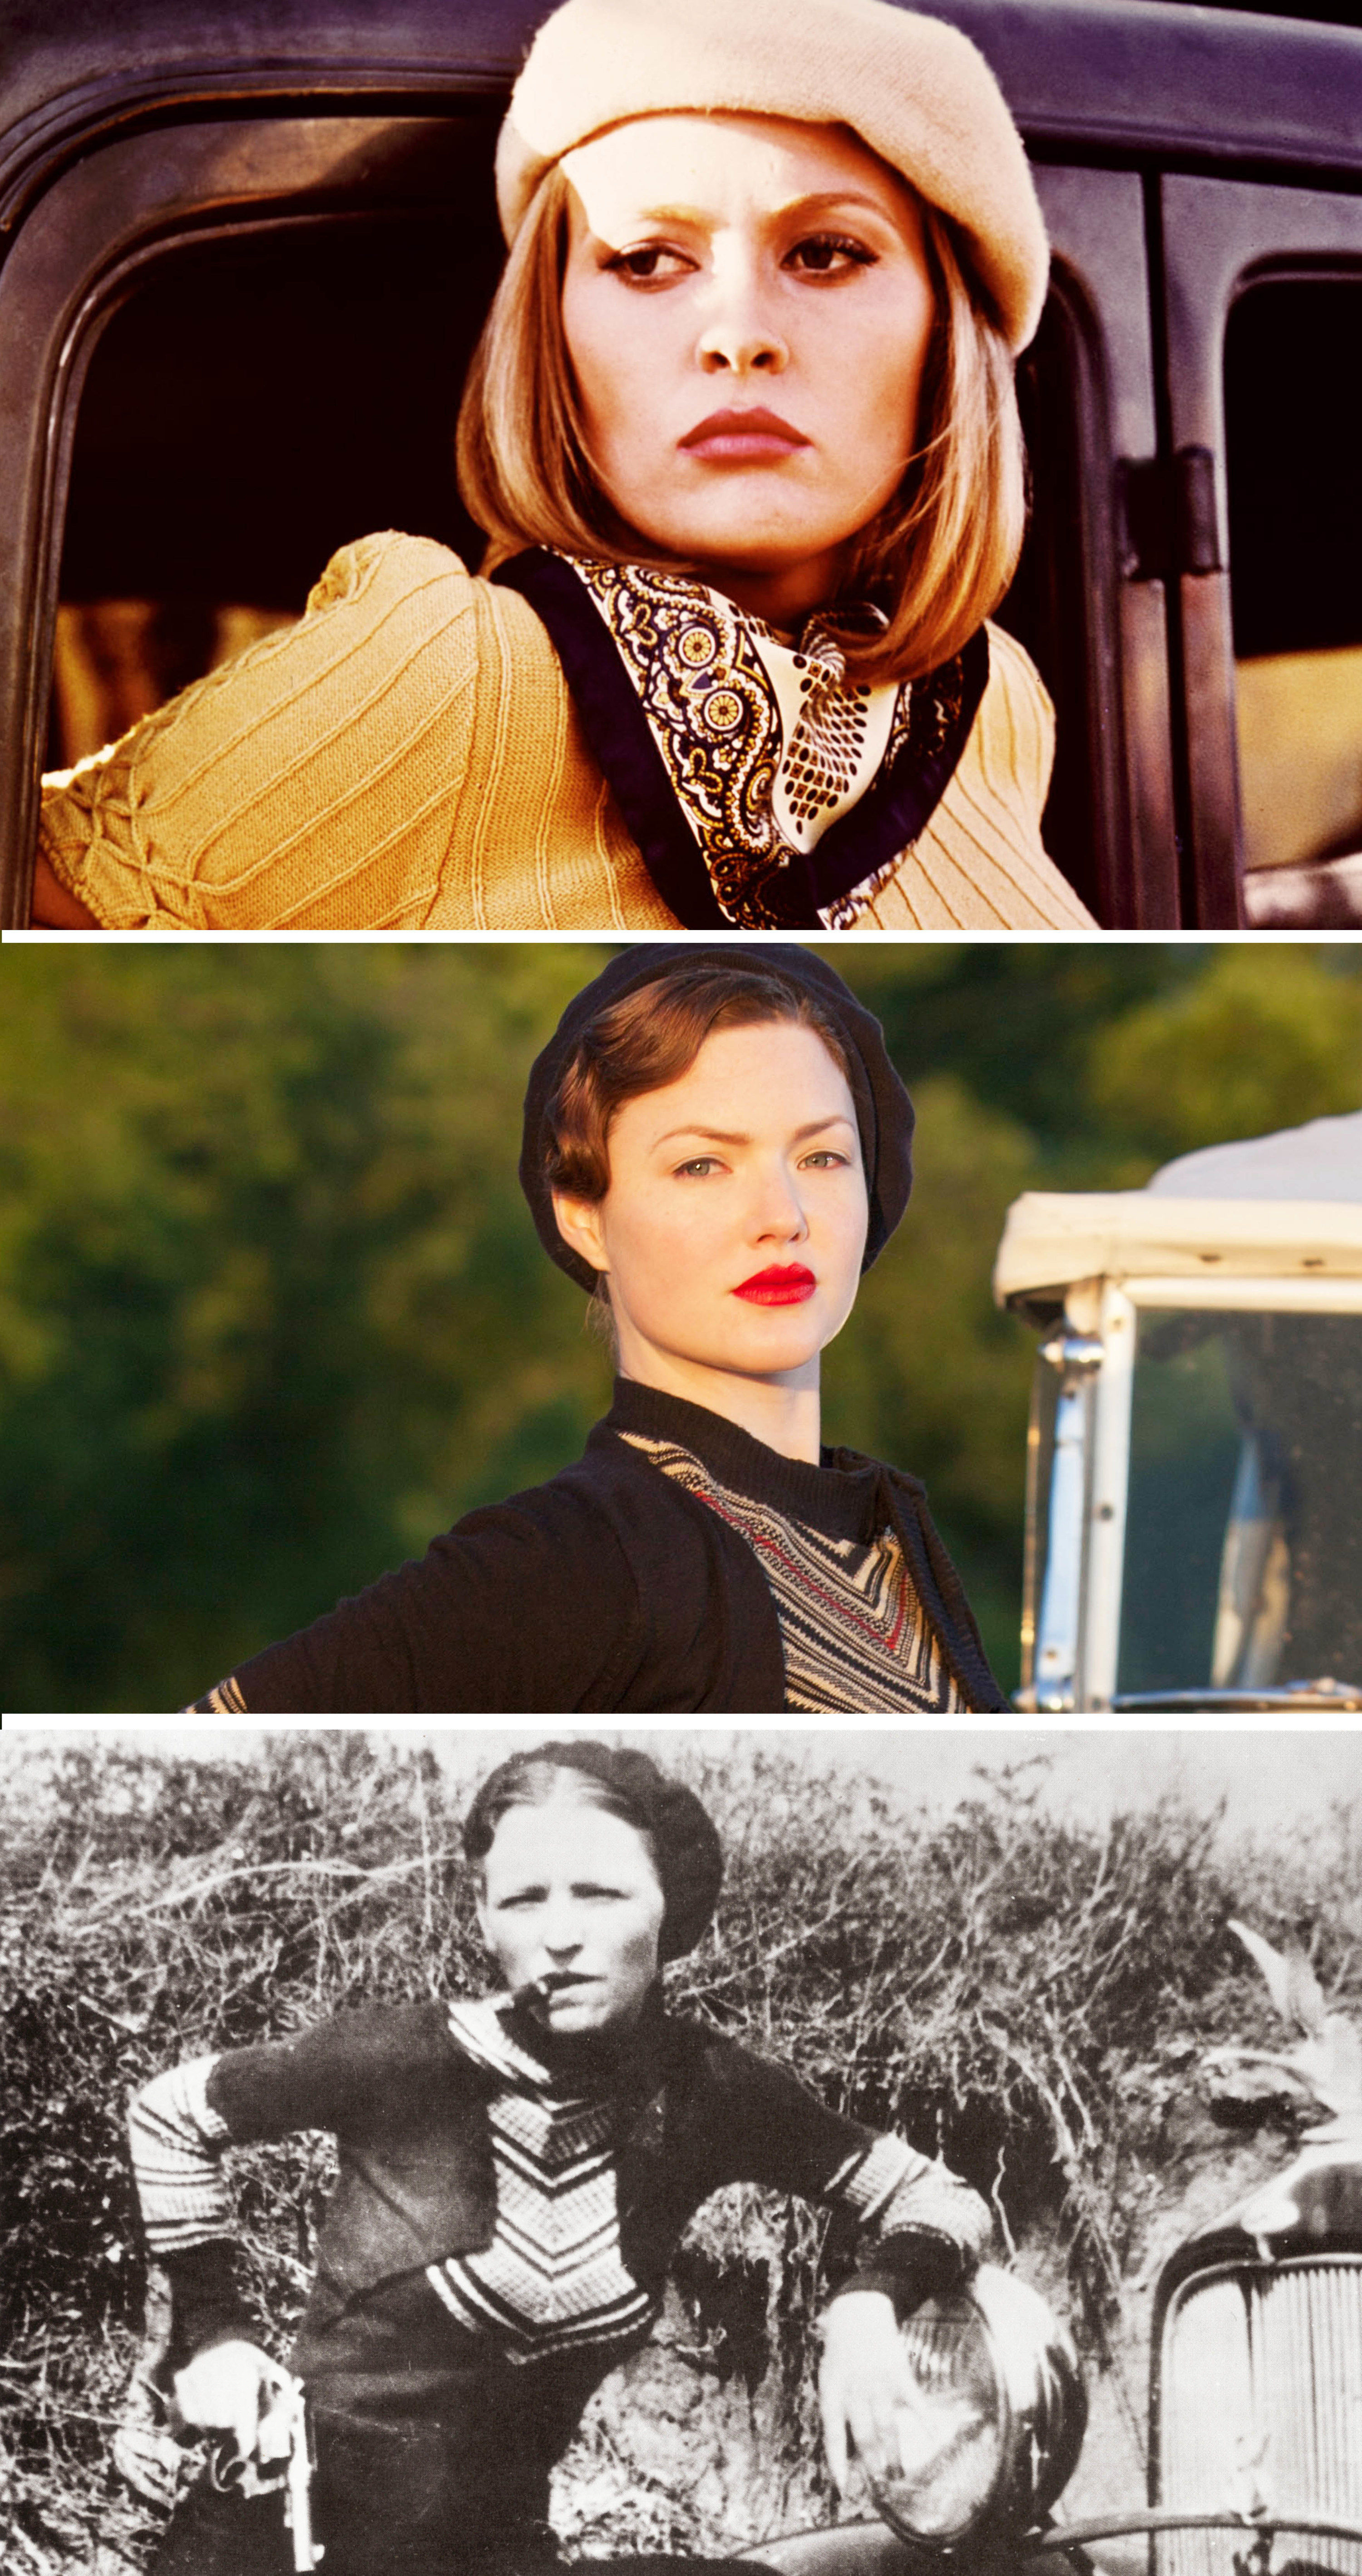 Side-by-sides of Faye Dunaway, Holliday Grainger, and Bonnie Parker